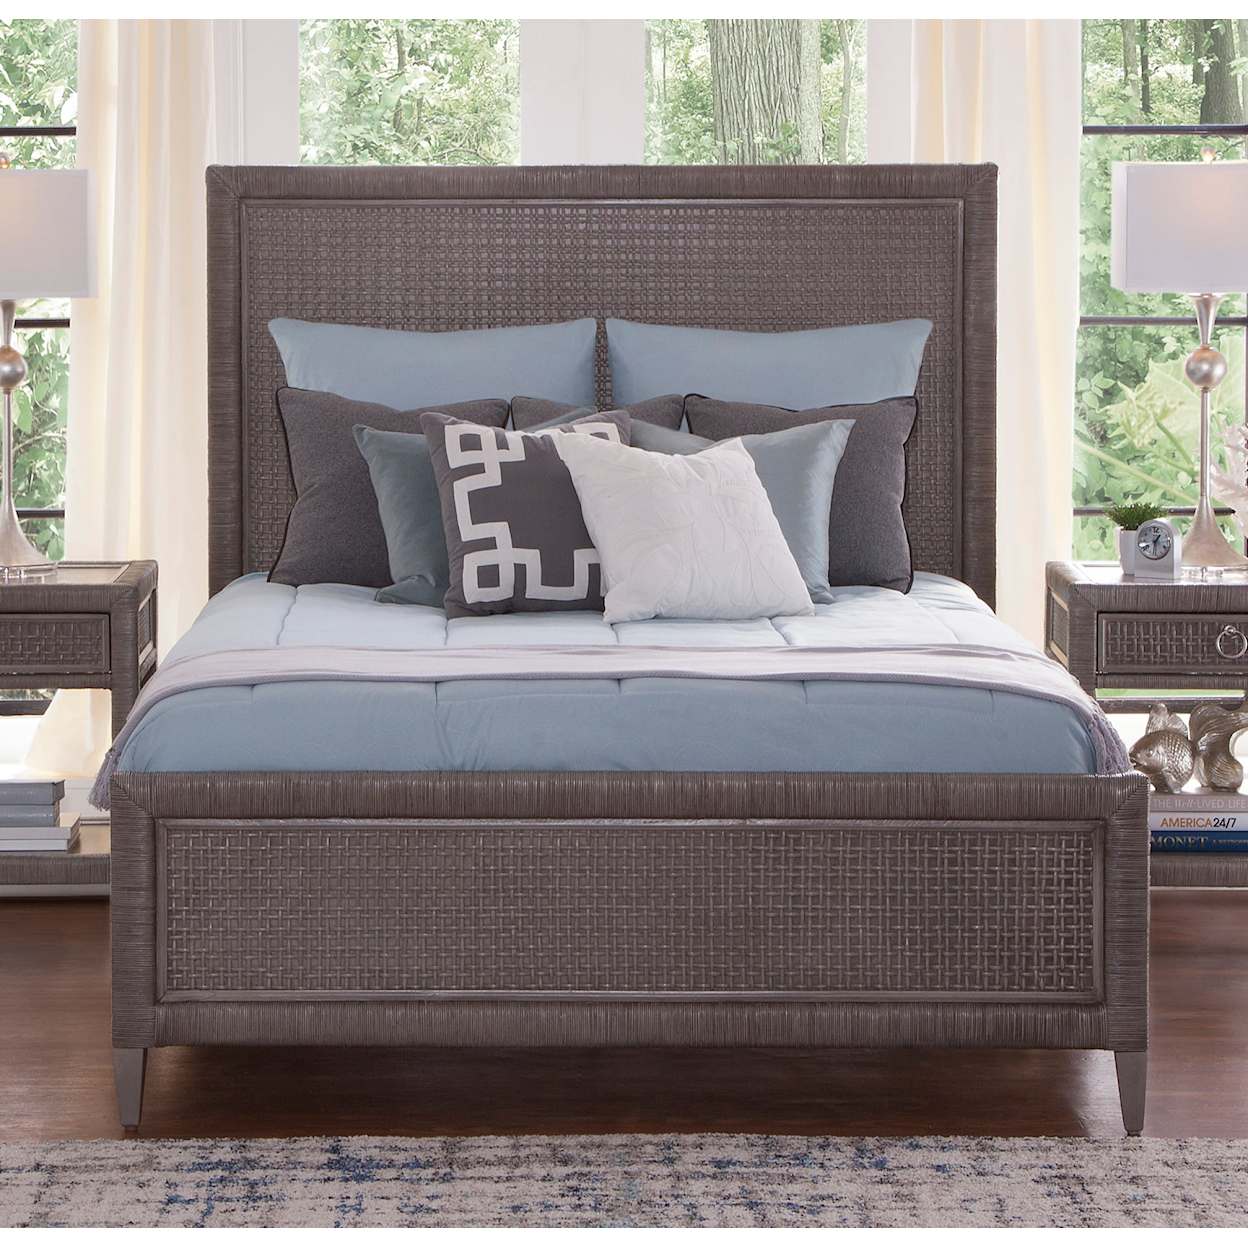 Braxton Culler Naples King Panel Bed